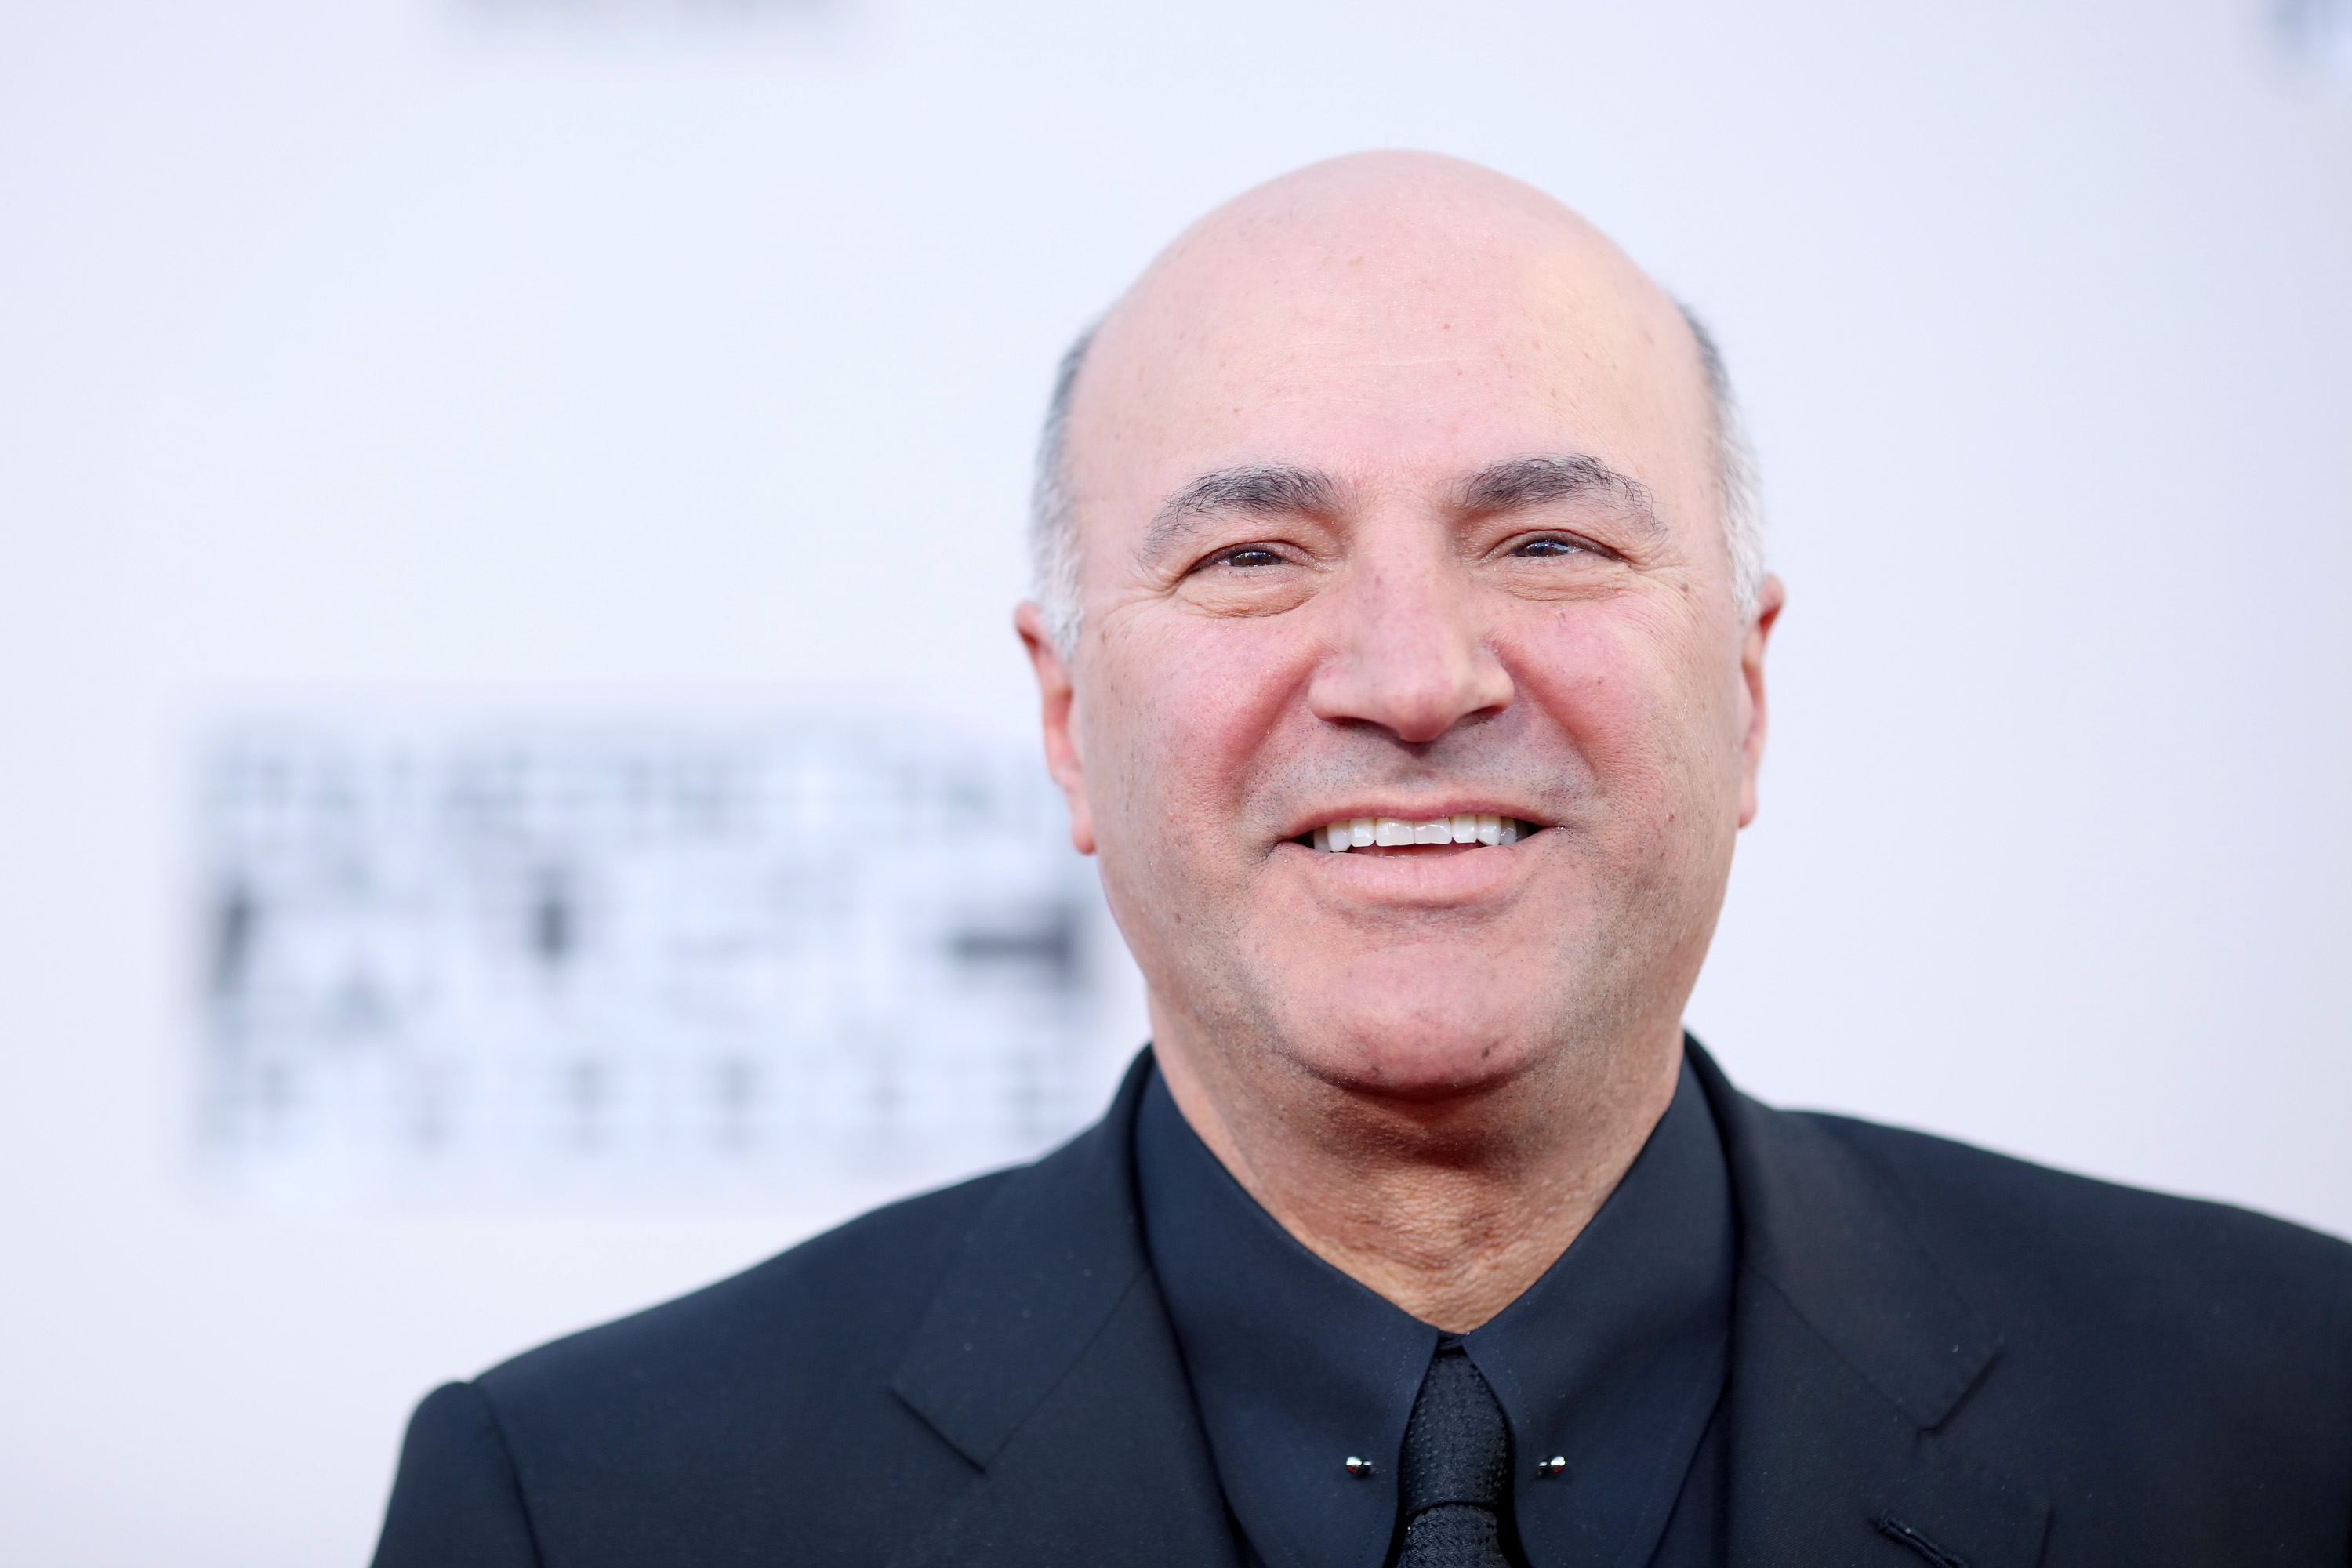 Kevin O'Leary Net Worth 5 Fast Facts You Need to Know